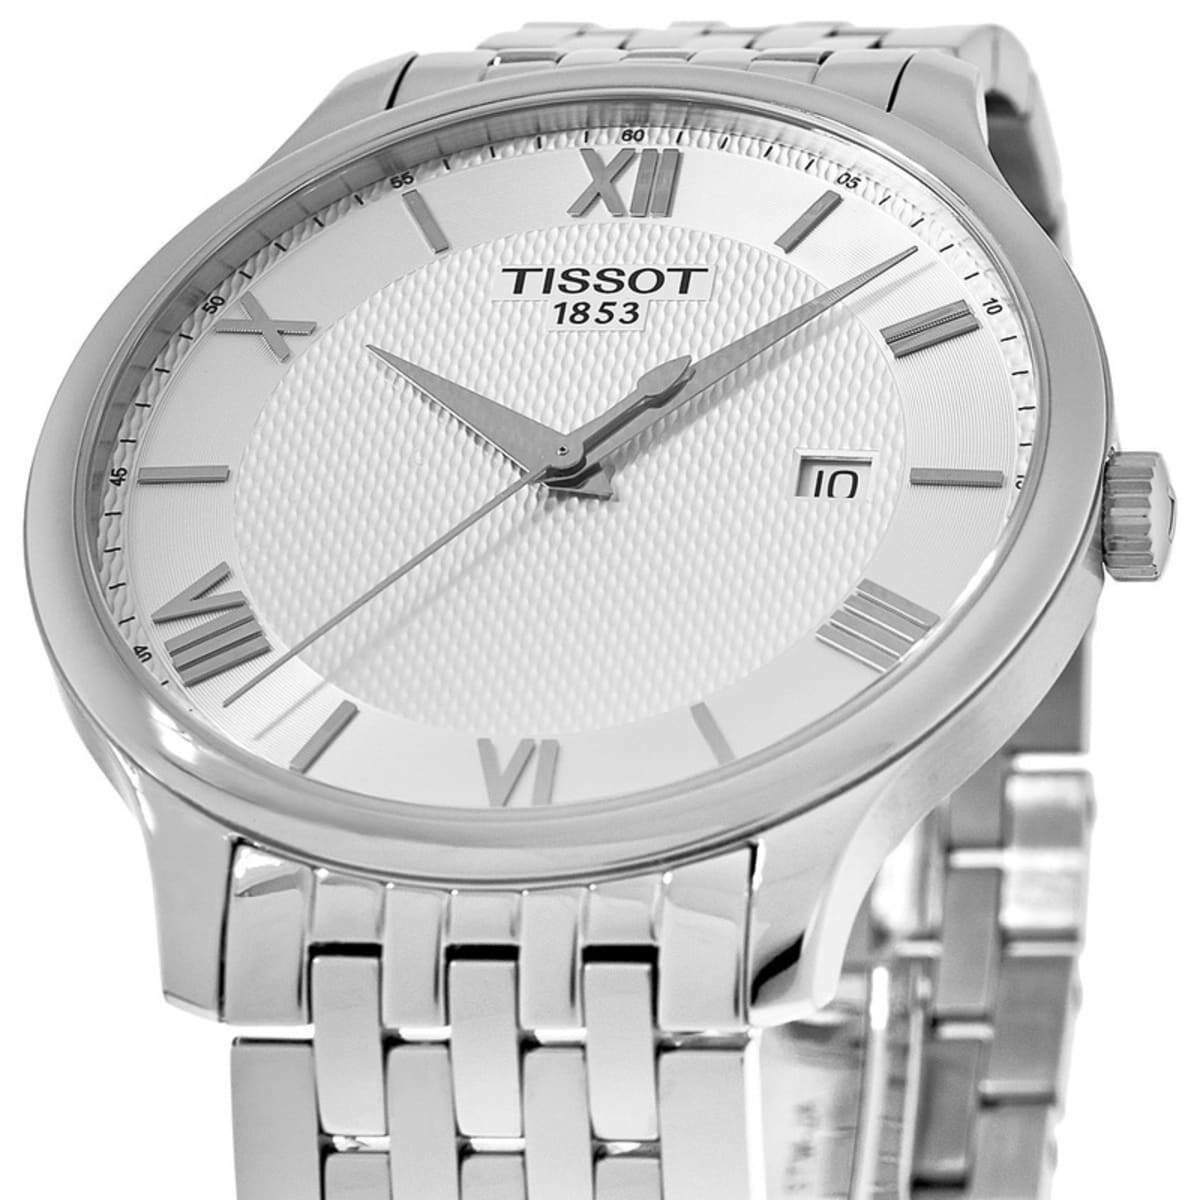 Tissot Swiss Made T-Classic Silver Tradition Stainless Steel Men's Watch T0636101103800 - Prestige